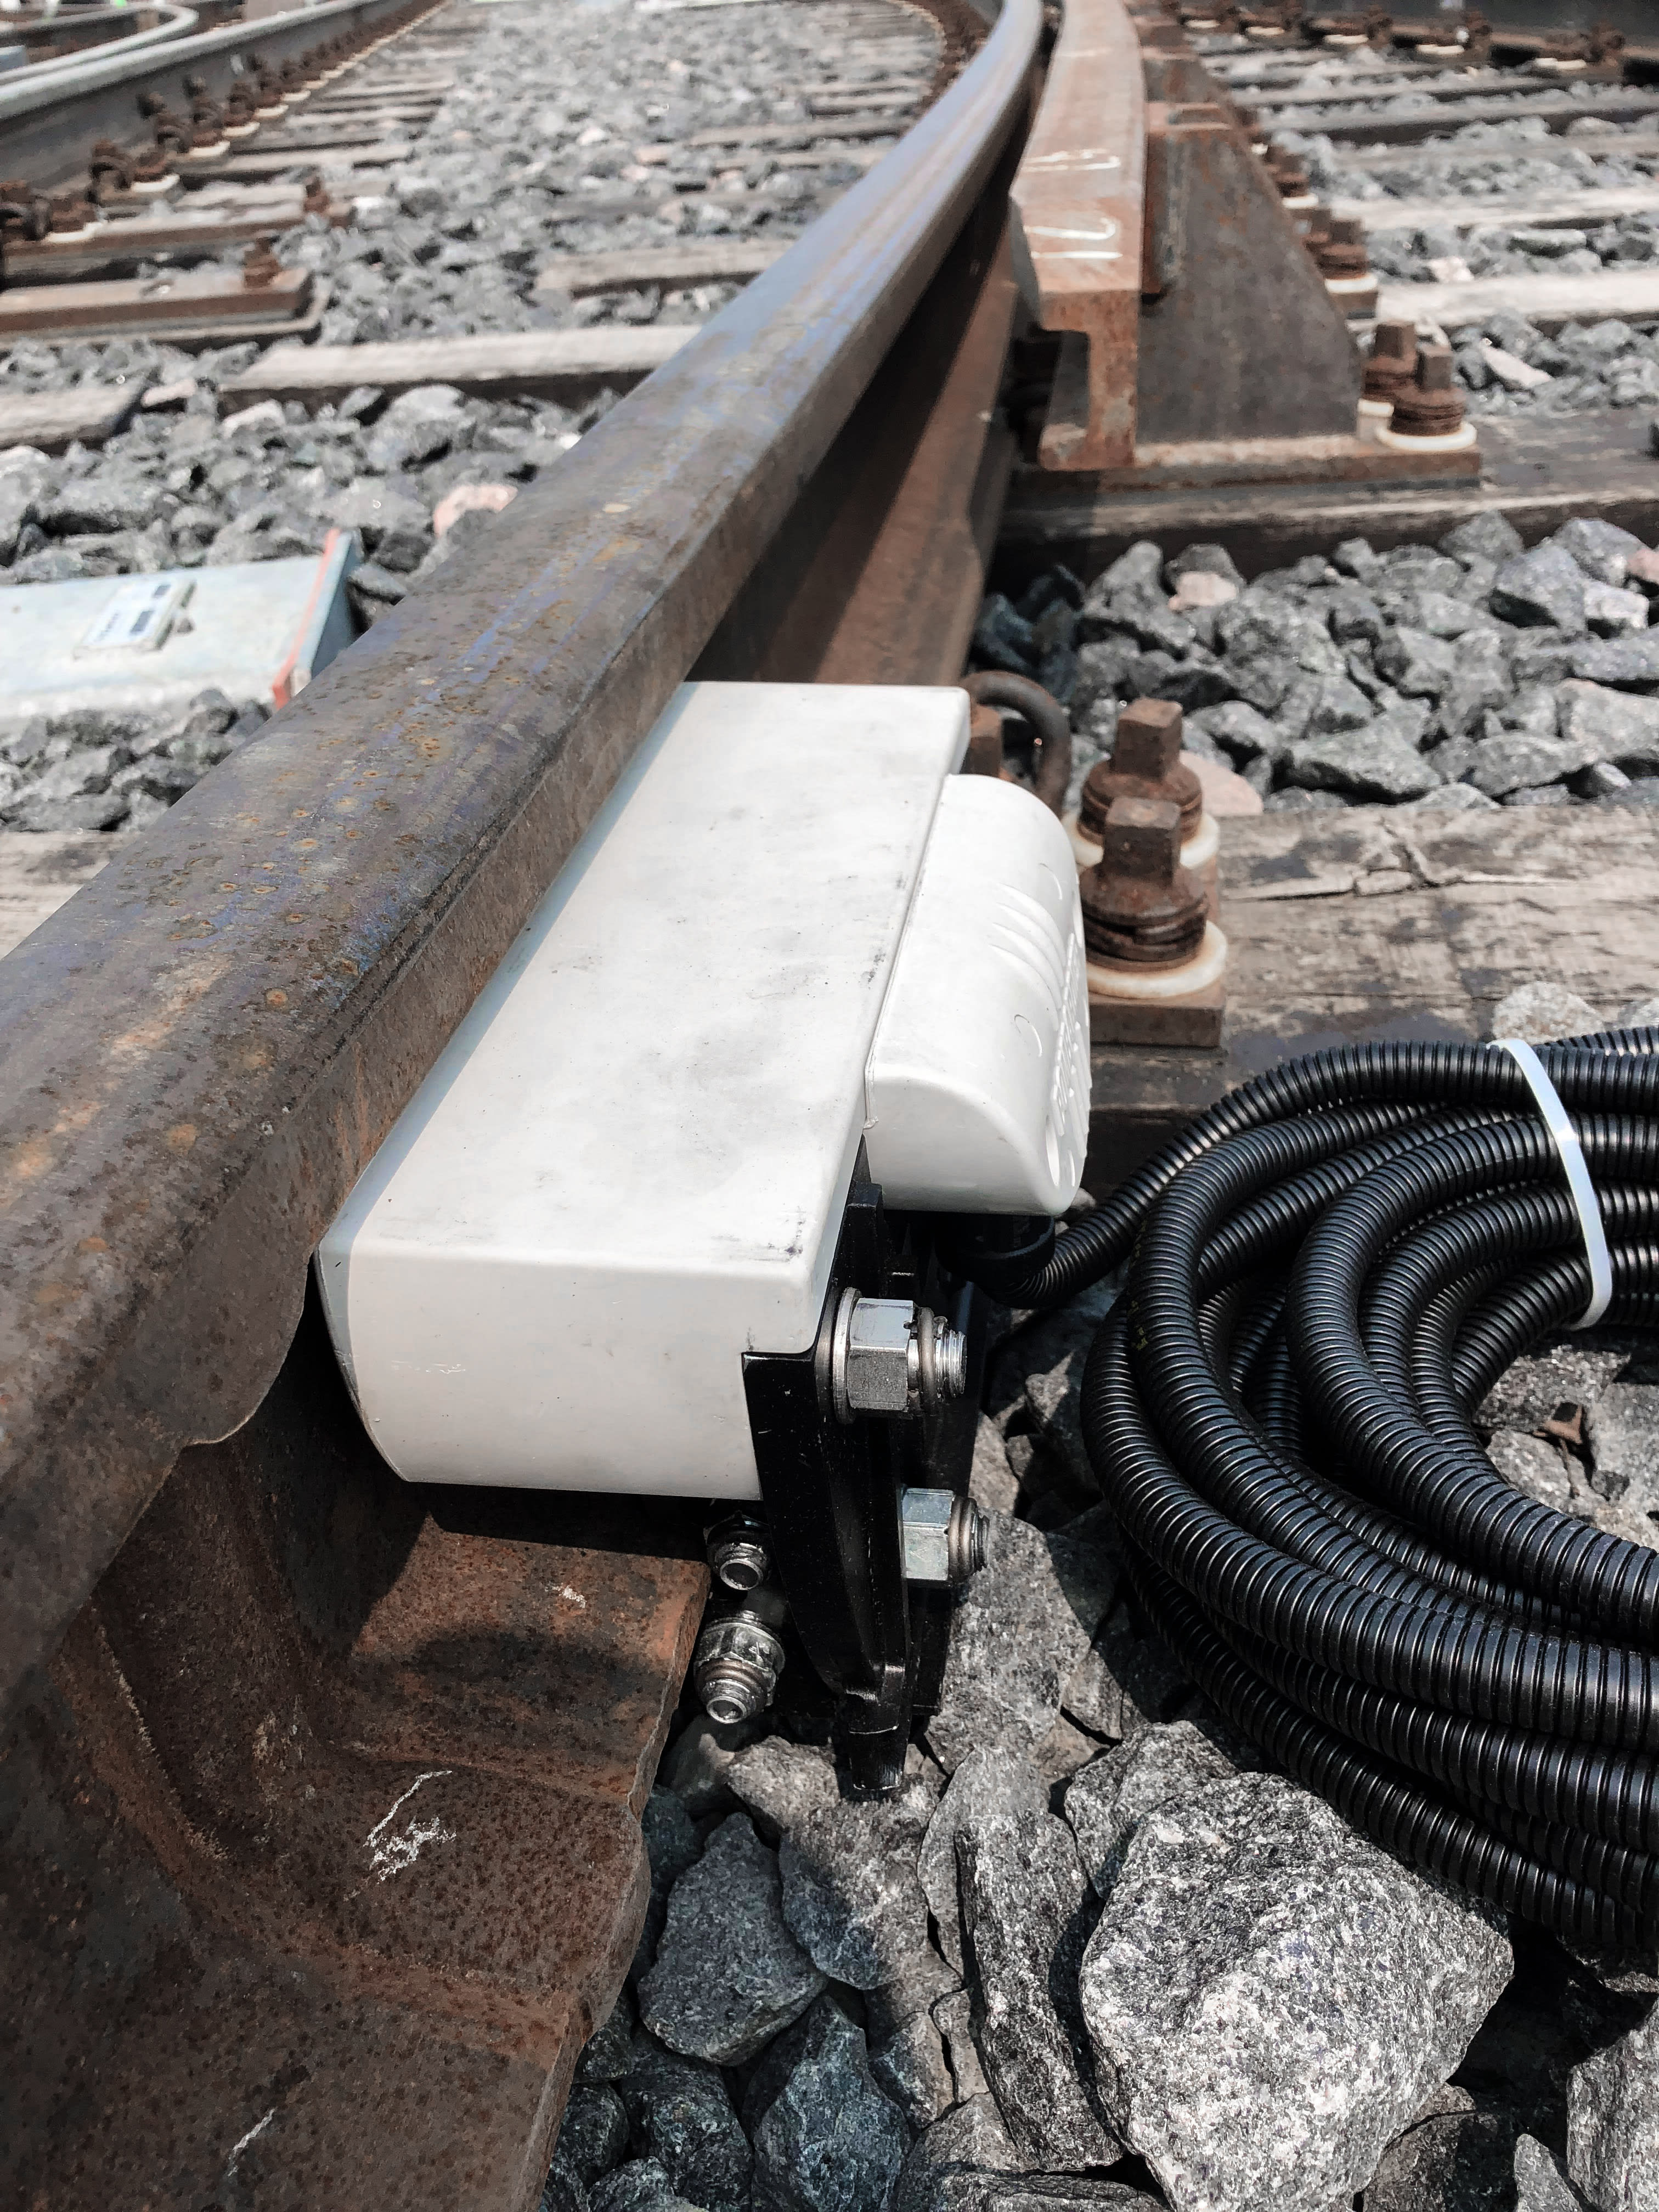 a small white electrical box, attached to the rails.